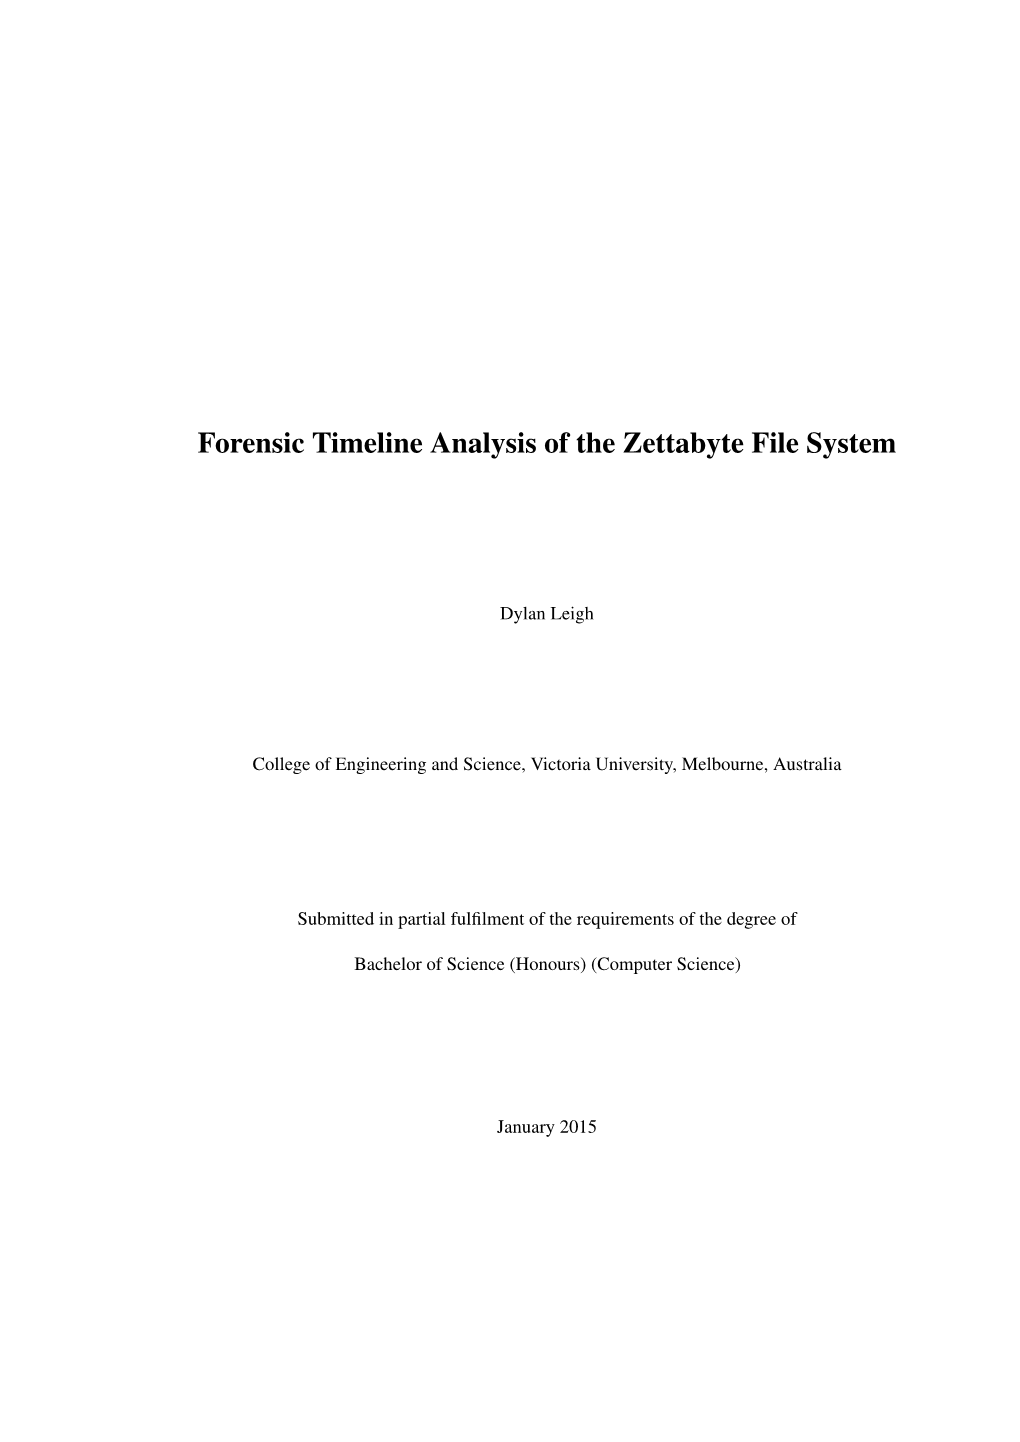 Forensic Timeline Analysis of the Zettabyte File System